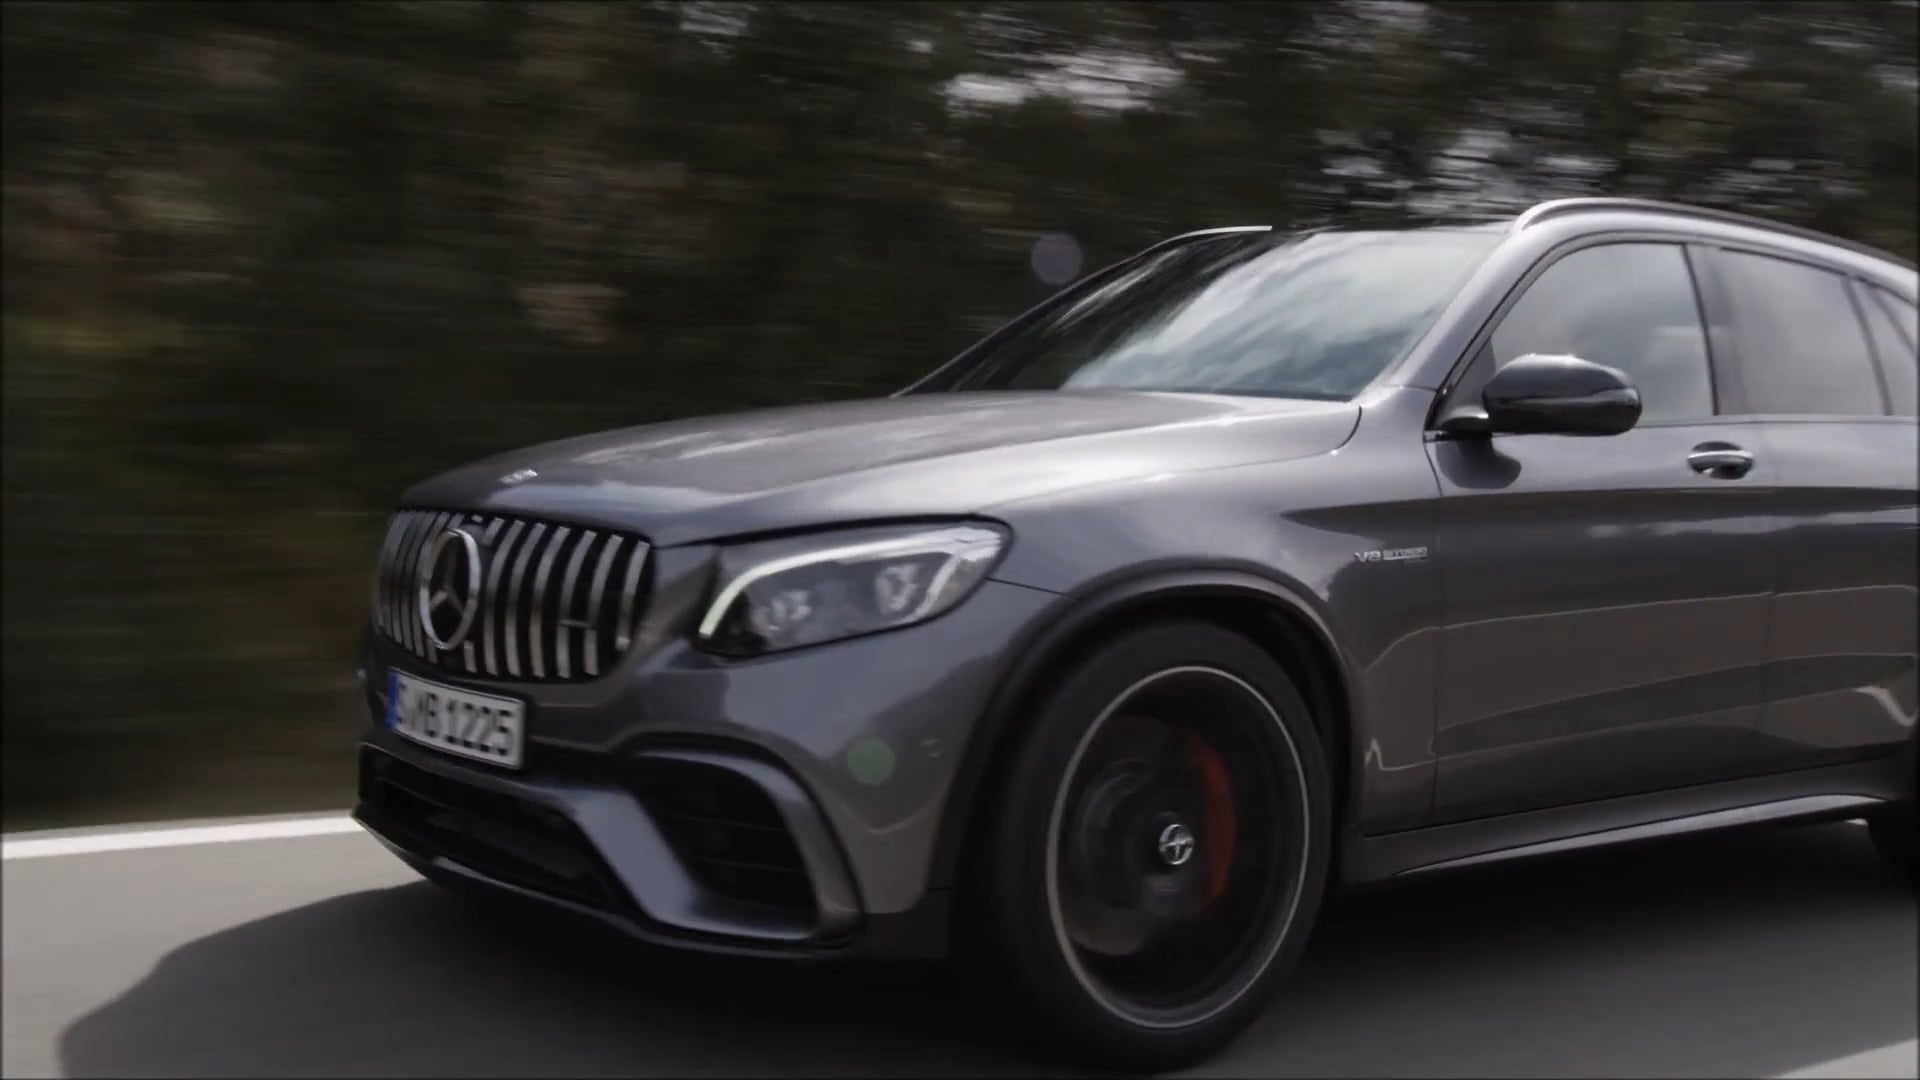 Overview: 2018 Mercedes-AMG GLC 63